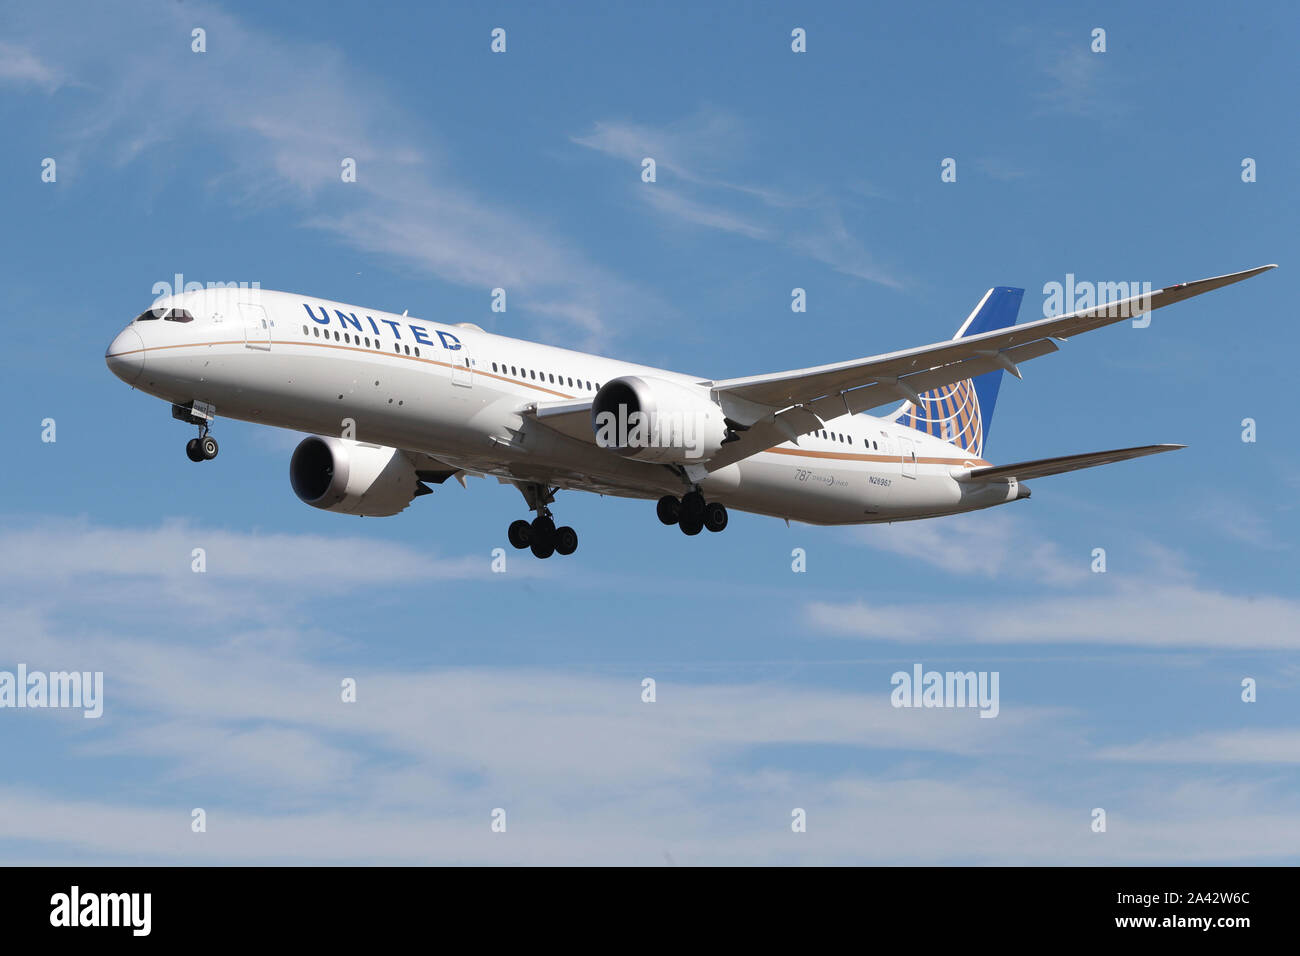 Boeing 787 - MSN 60144 - N26967 Airline United Airlines coming down to land at London Heathrow Airport in the United Kingdom Stock Photo